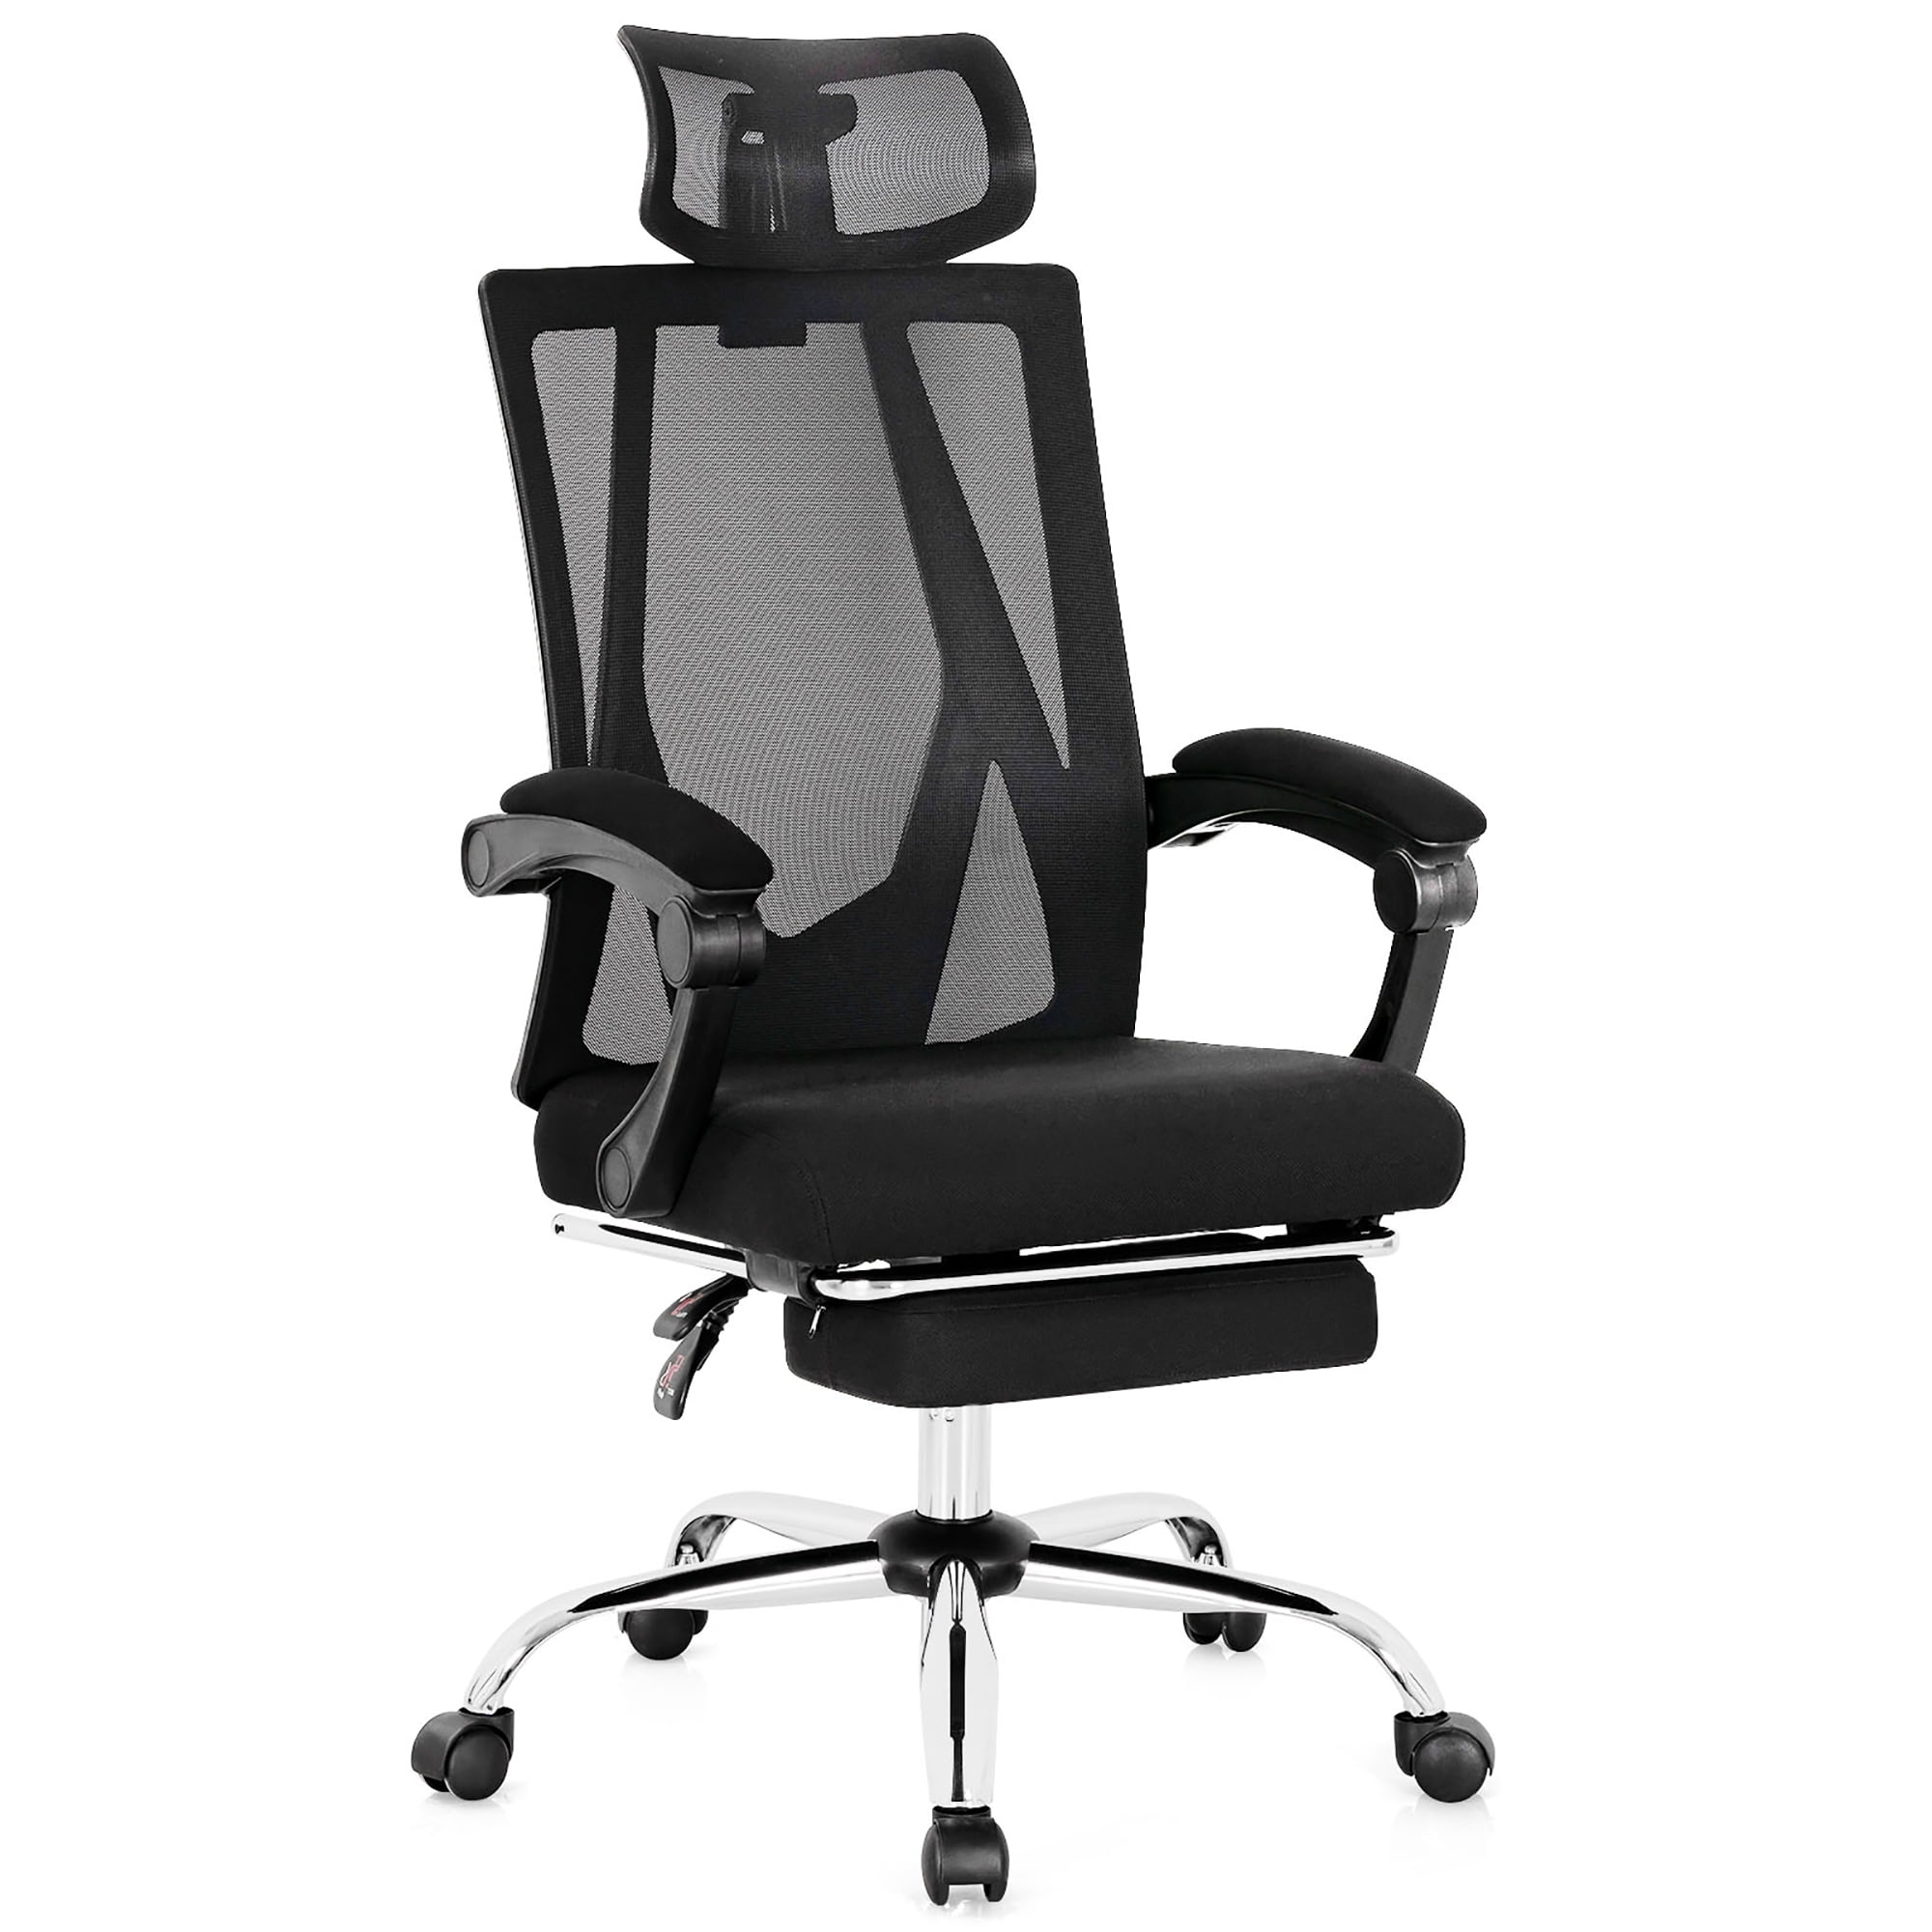 Black Mesh Fabric Computer PC Office Swivel Chair Height Adjustable Seat 